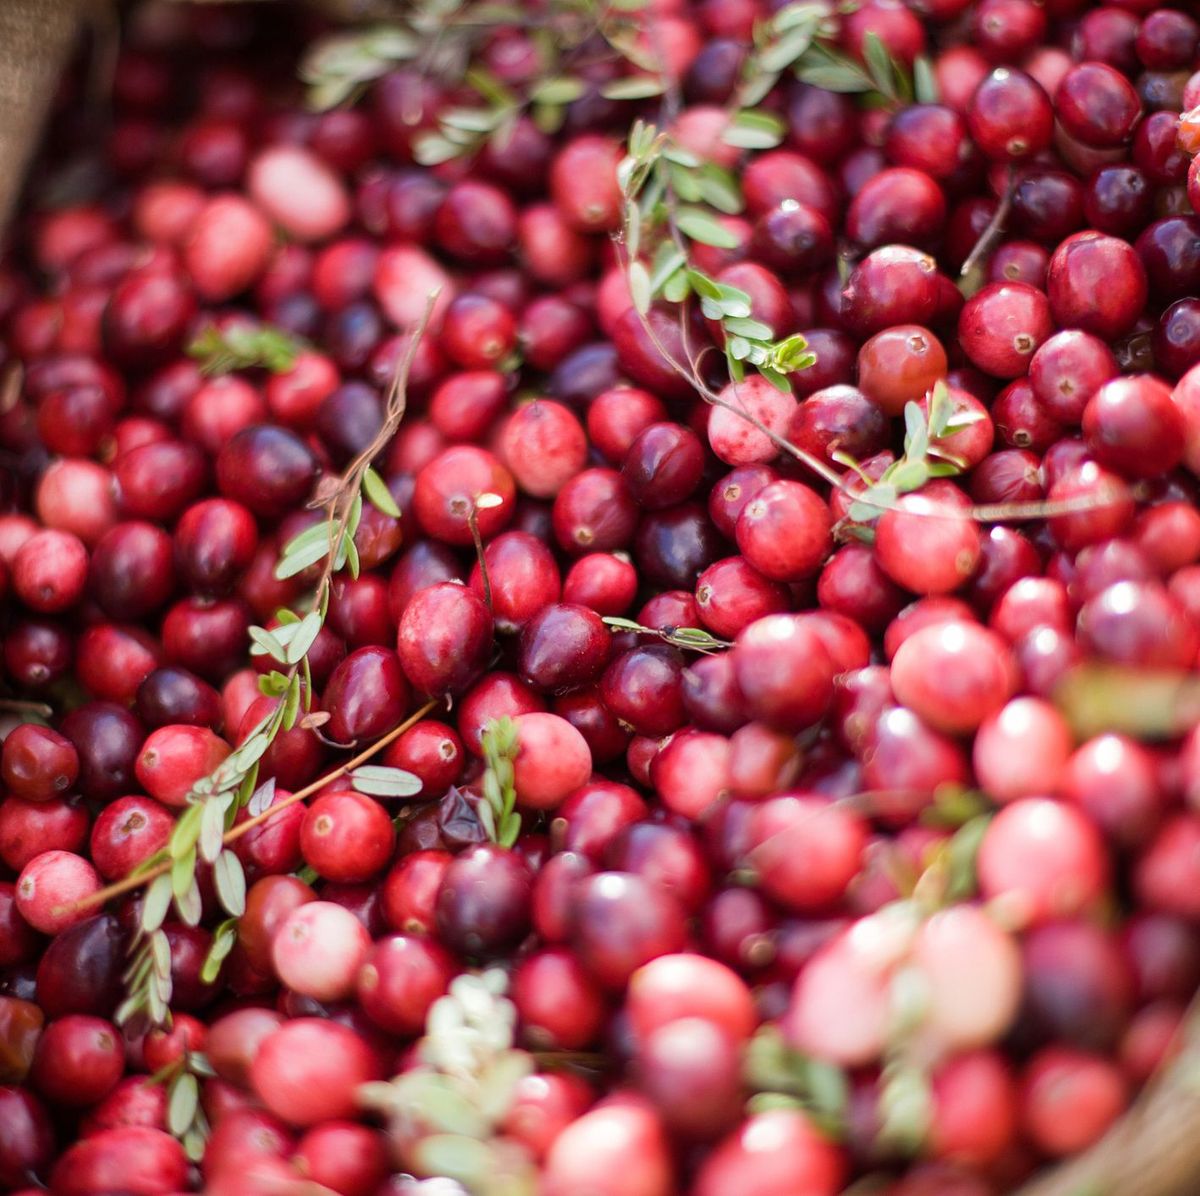 Are Cranberries Good for You? - Cranberry Health Benefits